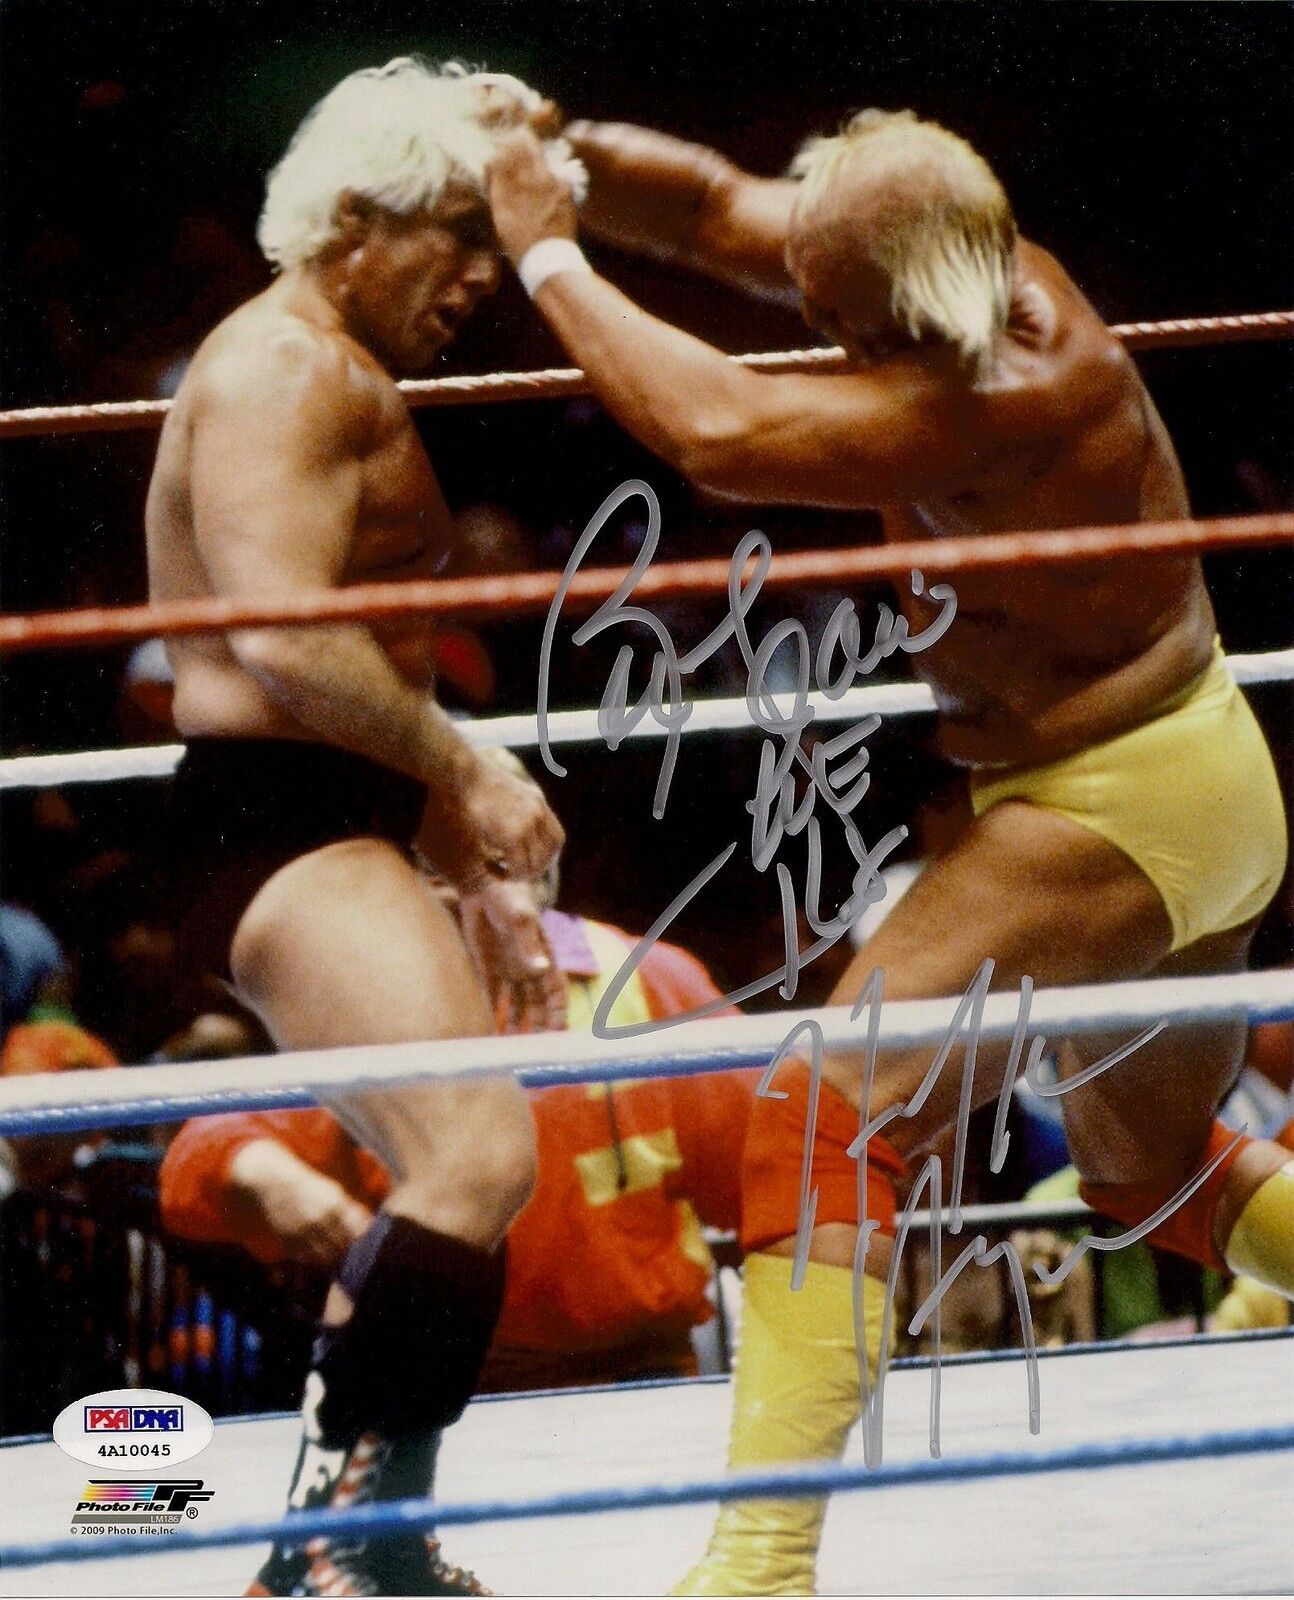 Hulk Hogan & Ric Flair Signed WWE 8x10 Photo Poster painting PSA/DNA COA WCW Picture Autograph